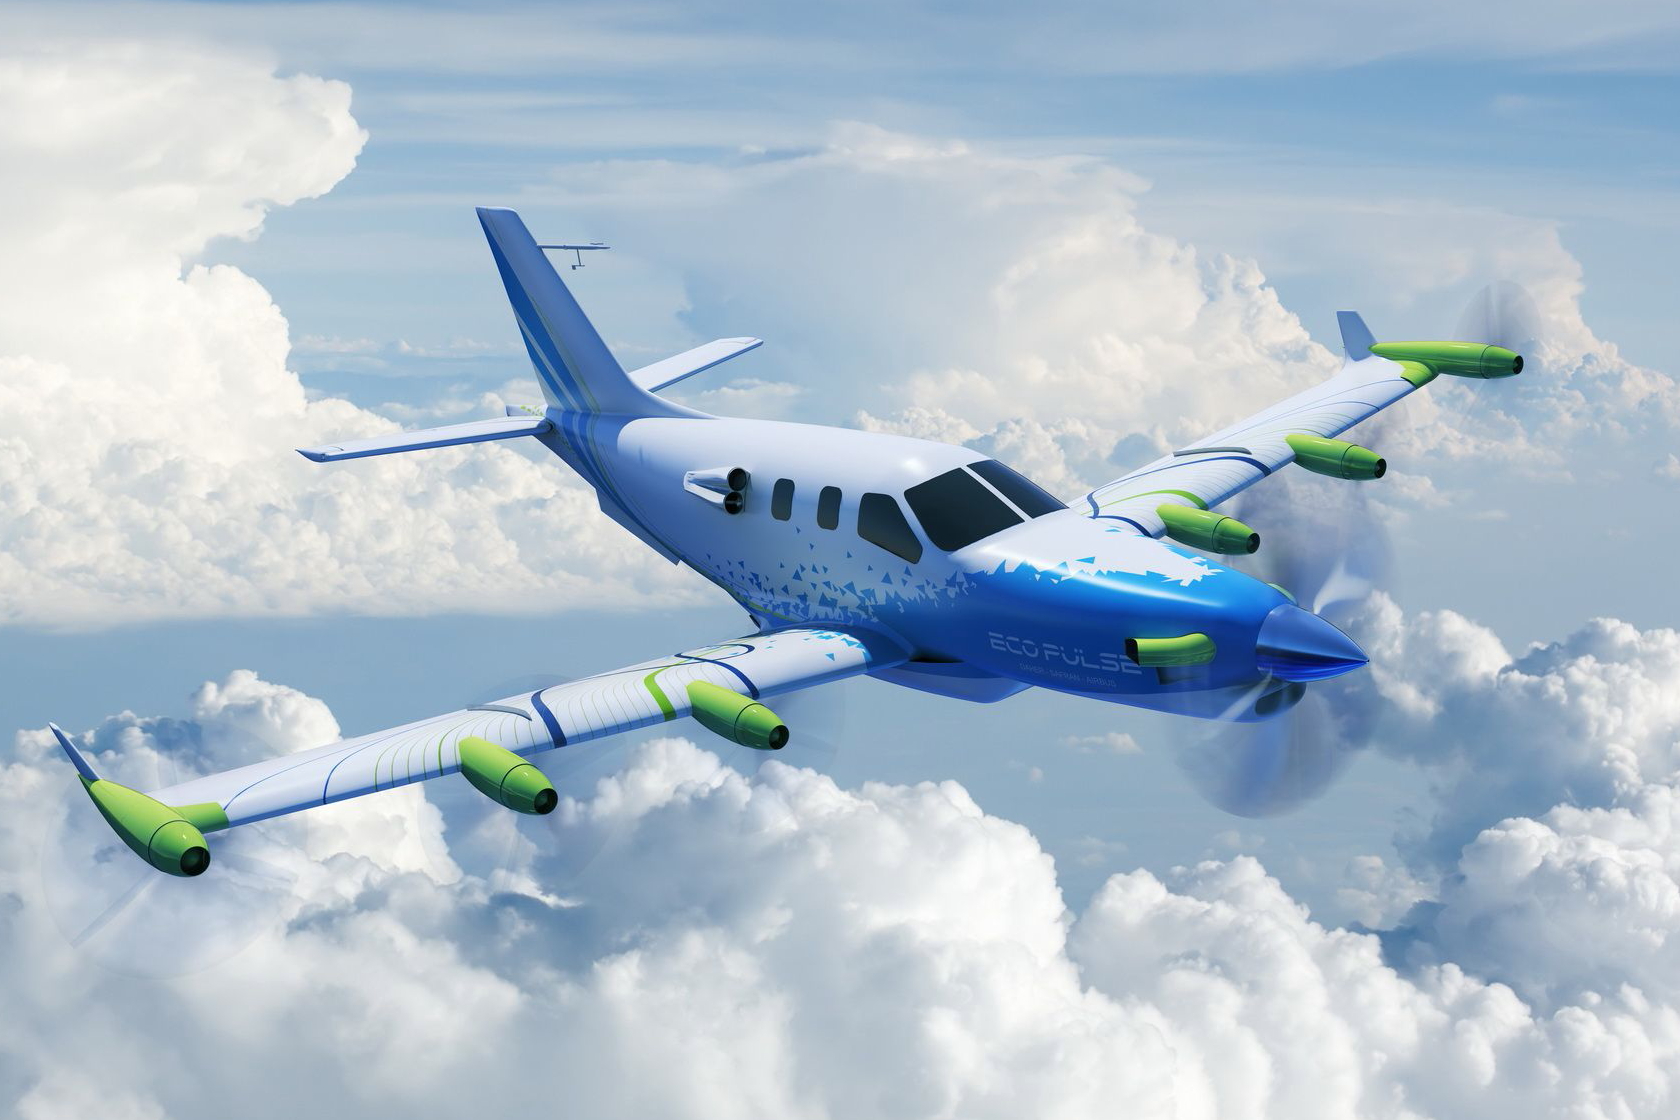 The EcoPulse distributed propulsion hybrid aircraft demonstrator, being developed by Daher, Safran and Airbus with the support of France’s CORAC civil aviation research council, has passed its Preliminary Design Review (PDR), the first key step toward validating the project’s feasibility and firming up the architecture for a first flight scheduled for 2022. Click to enlarge.